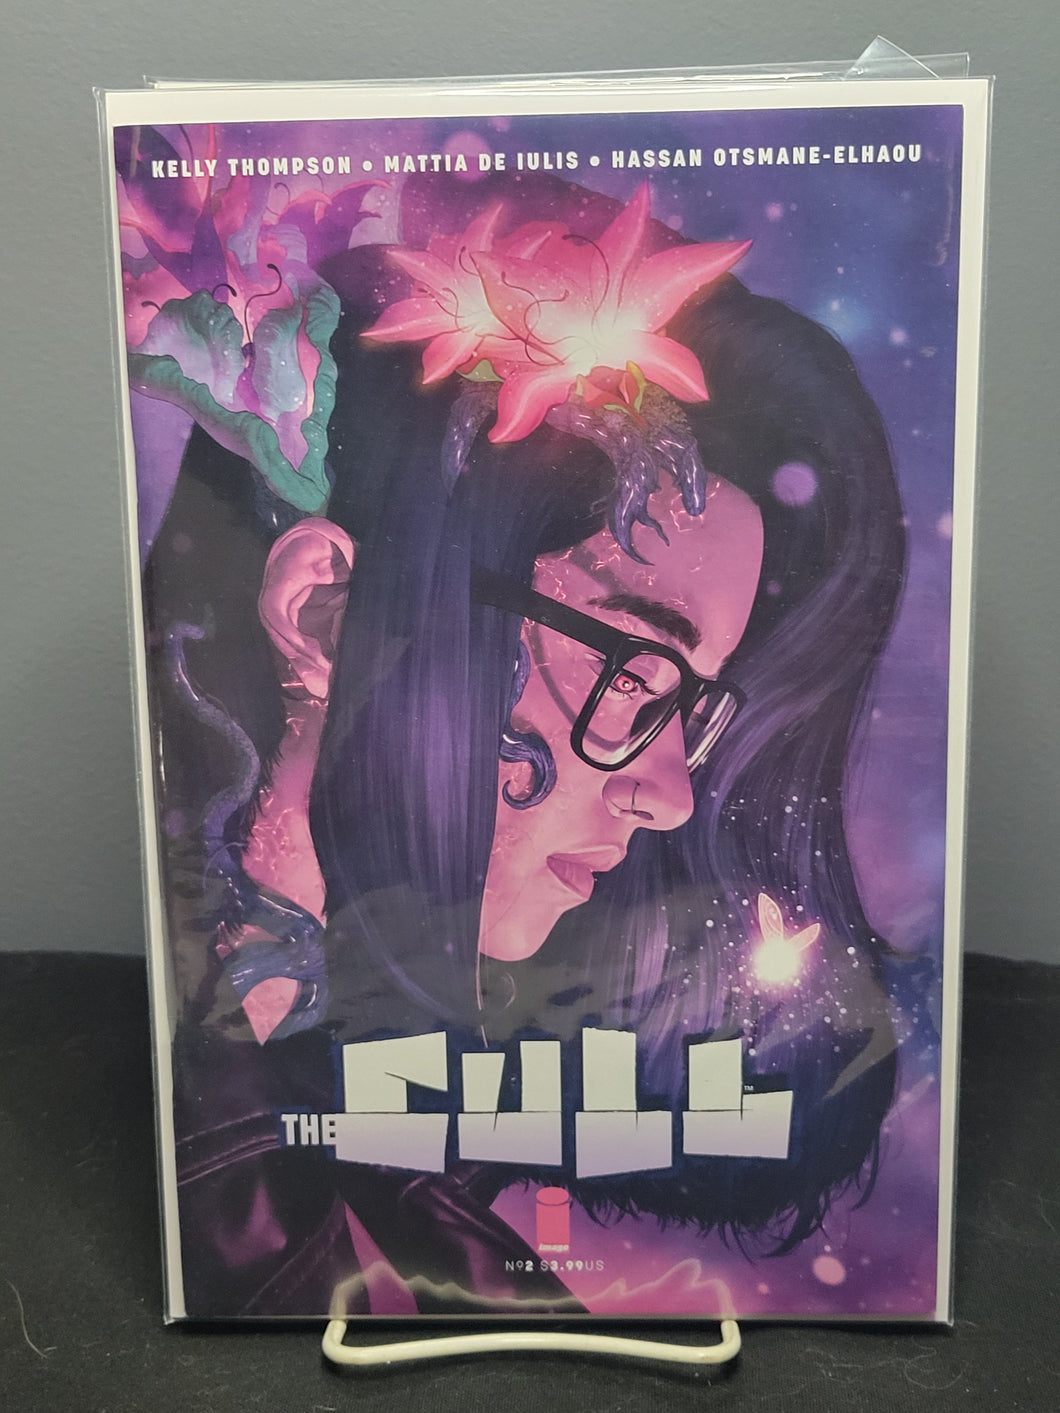 The Cull #2